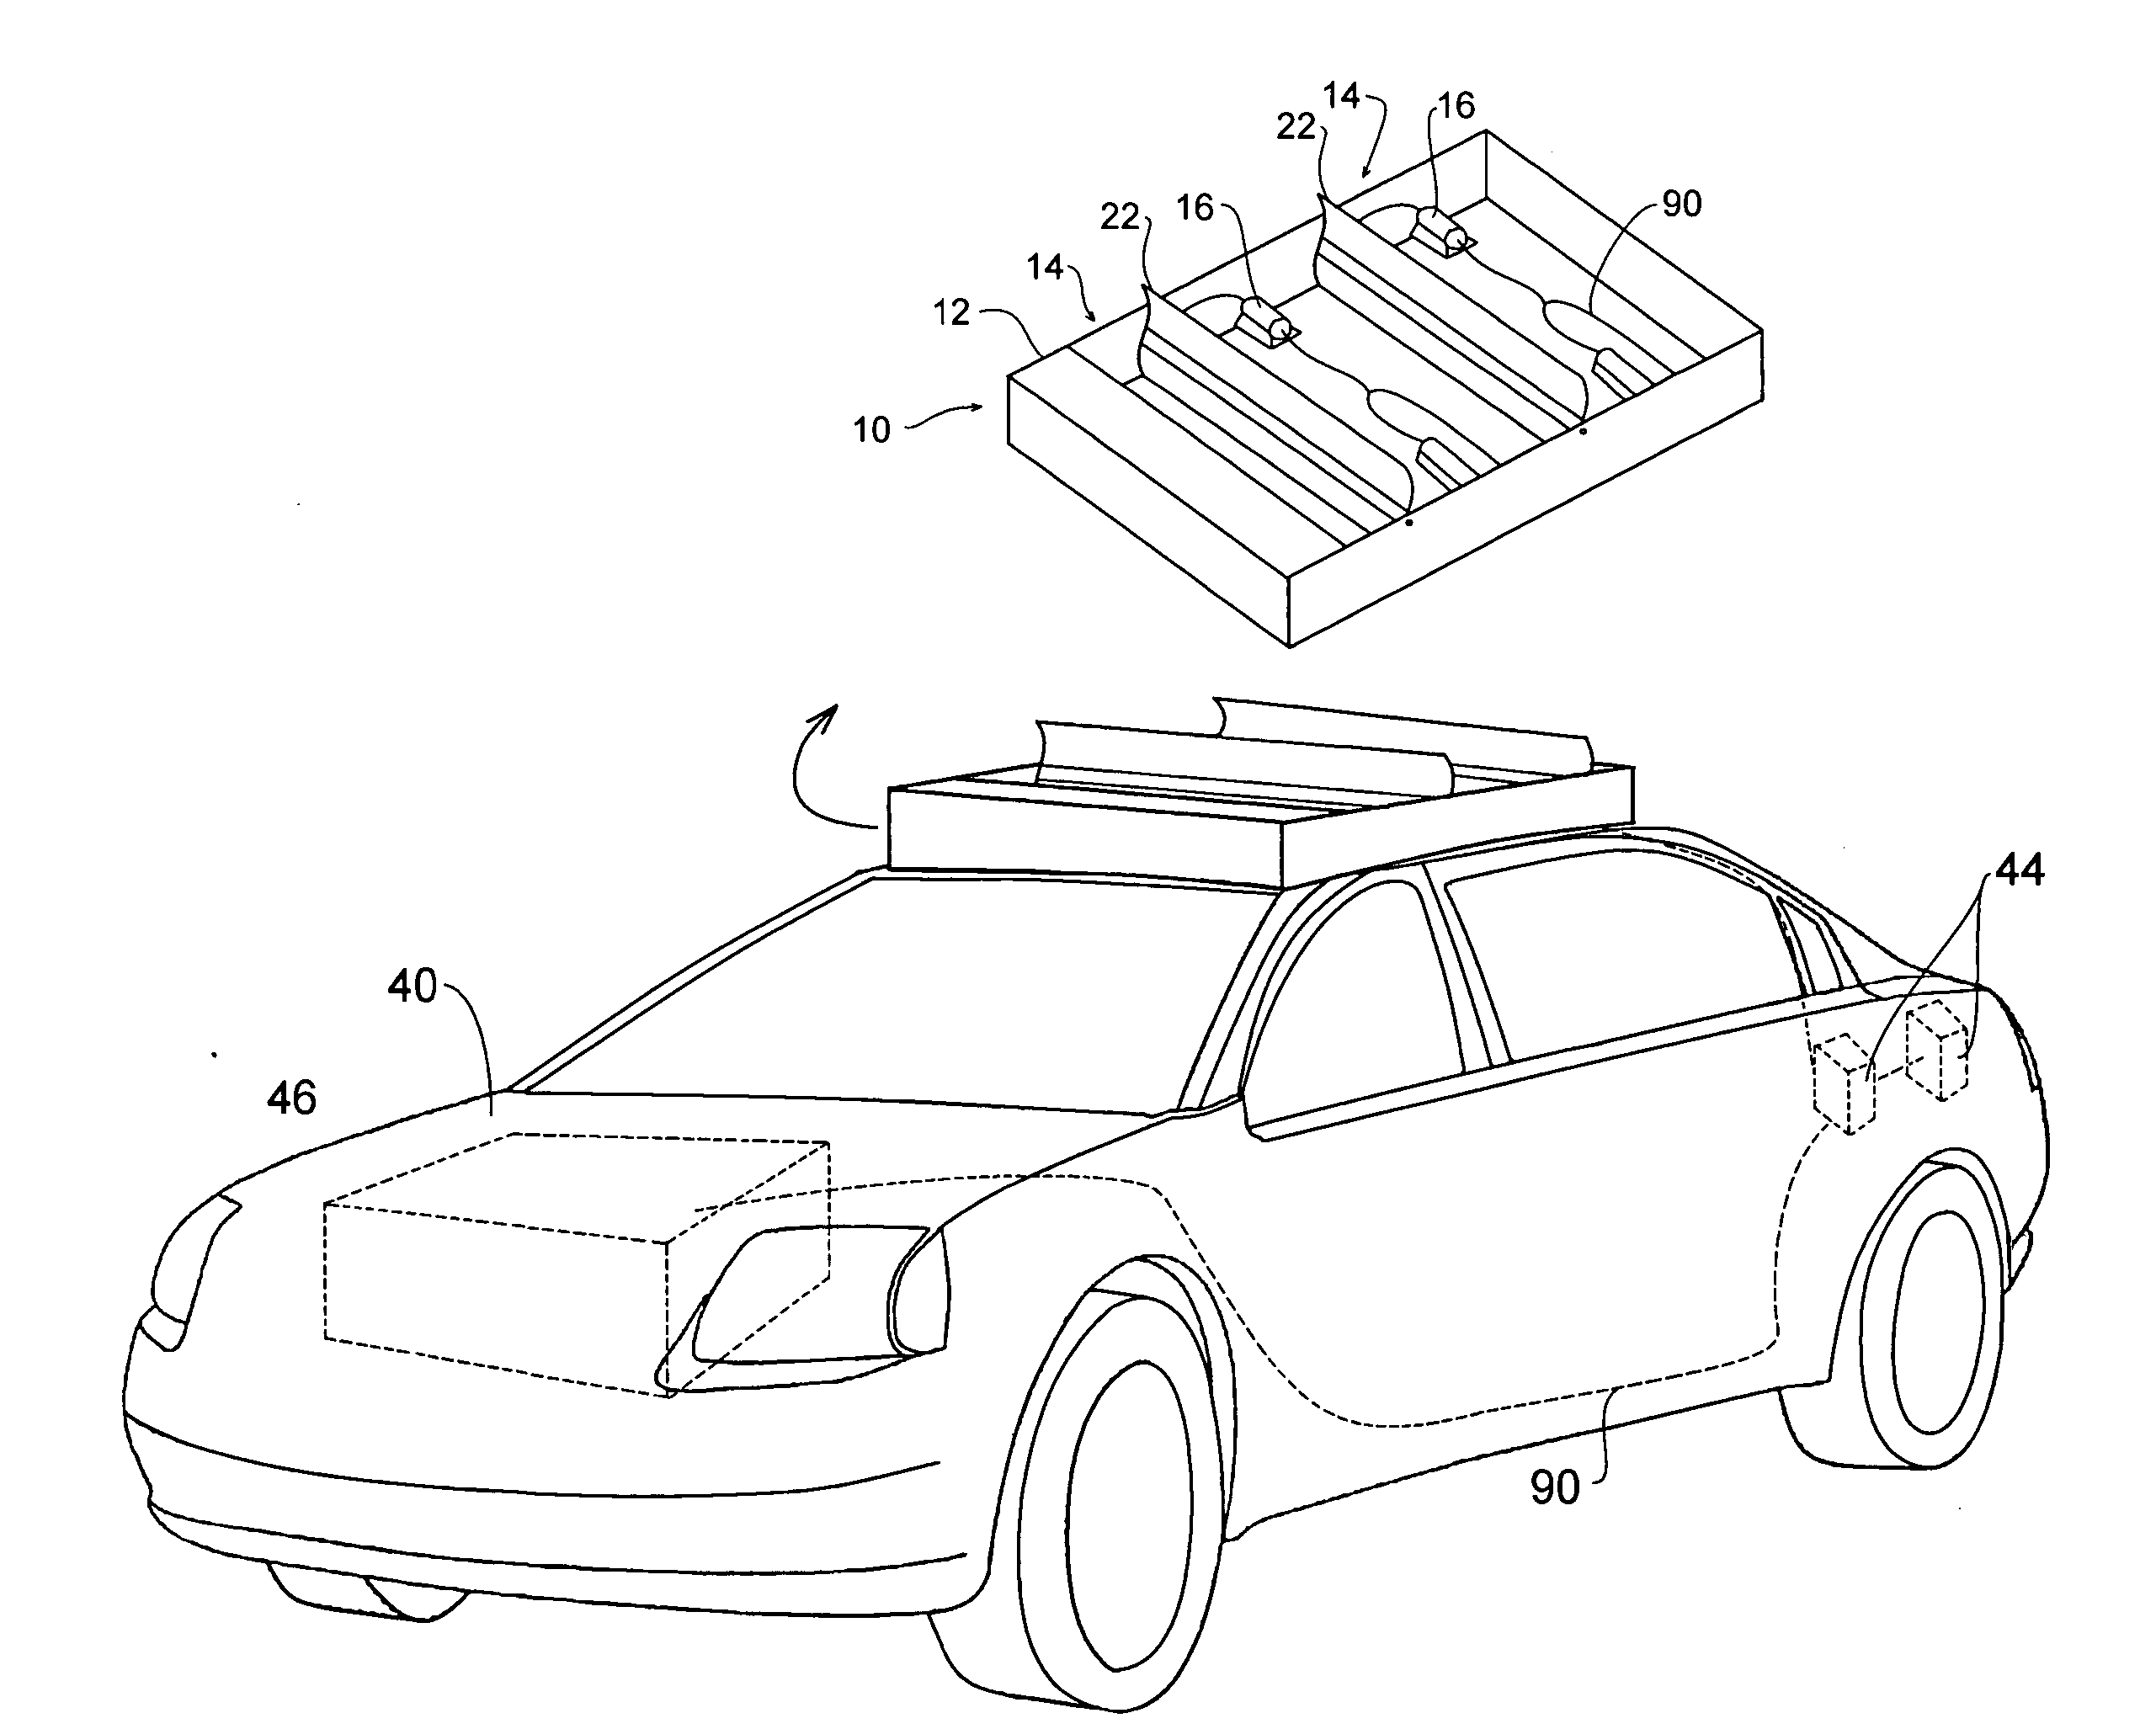 Current powered vehicle